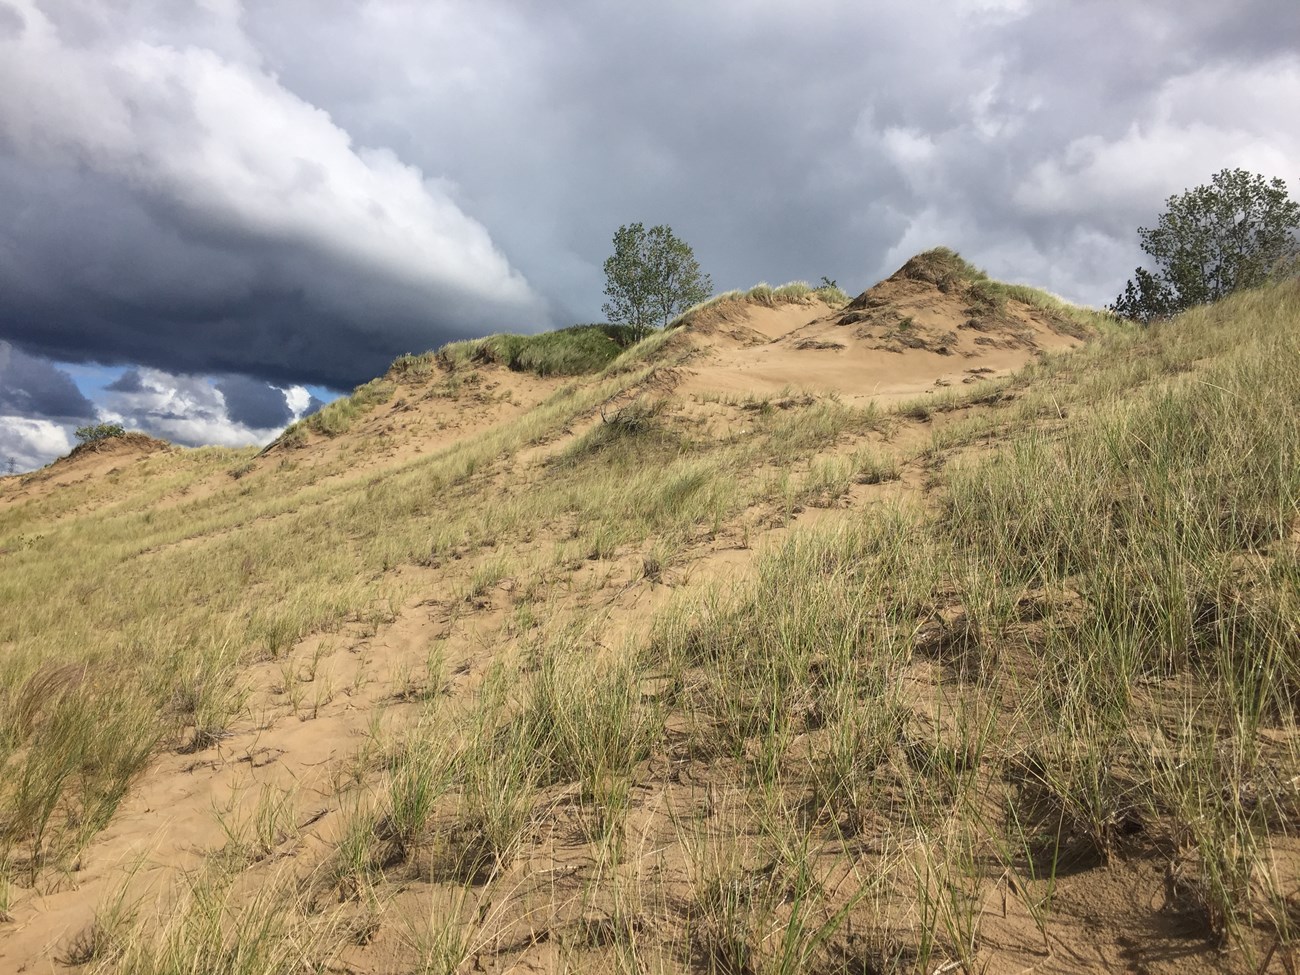 View of Mount Baldy, from mid- dune. Green marram grass clings to the sandy slopes and bright white clouds and blue skies are contrasted with dark clouds further away.